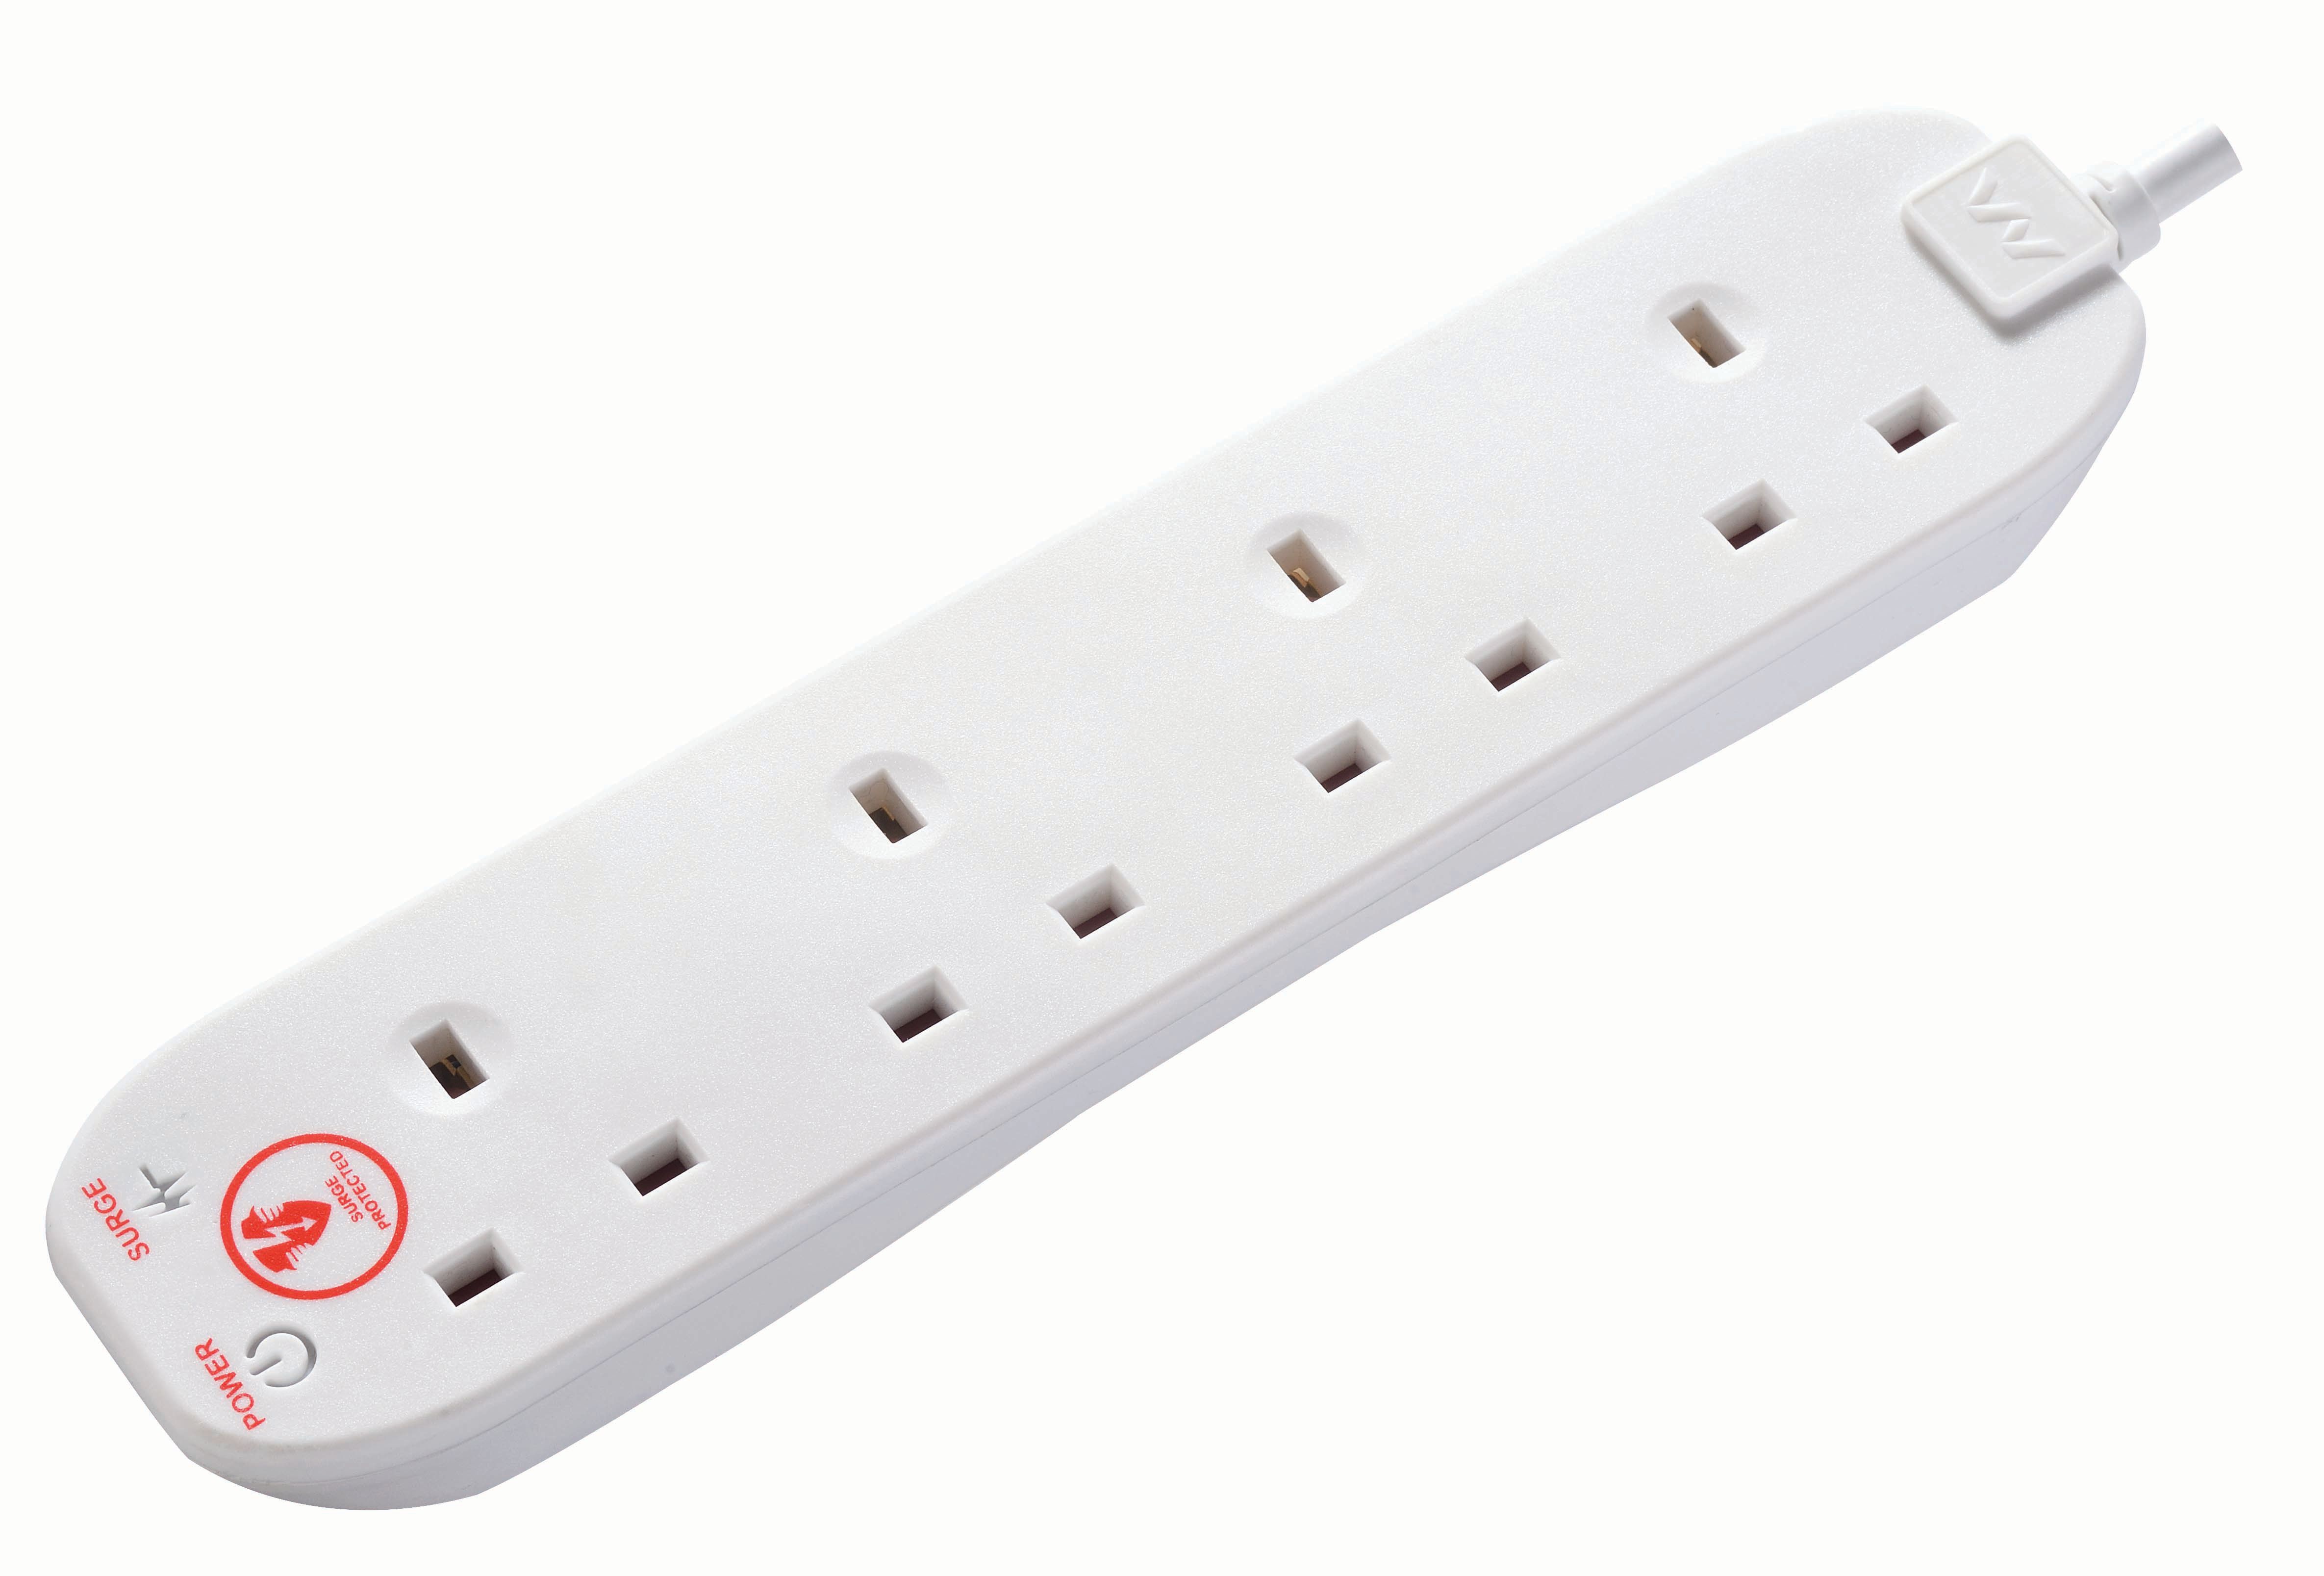 Masterplug 4 Socket Extension Lead With Surge Protection - White 2m Pack of 2 13A